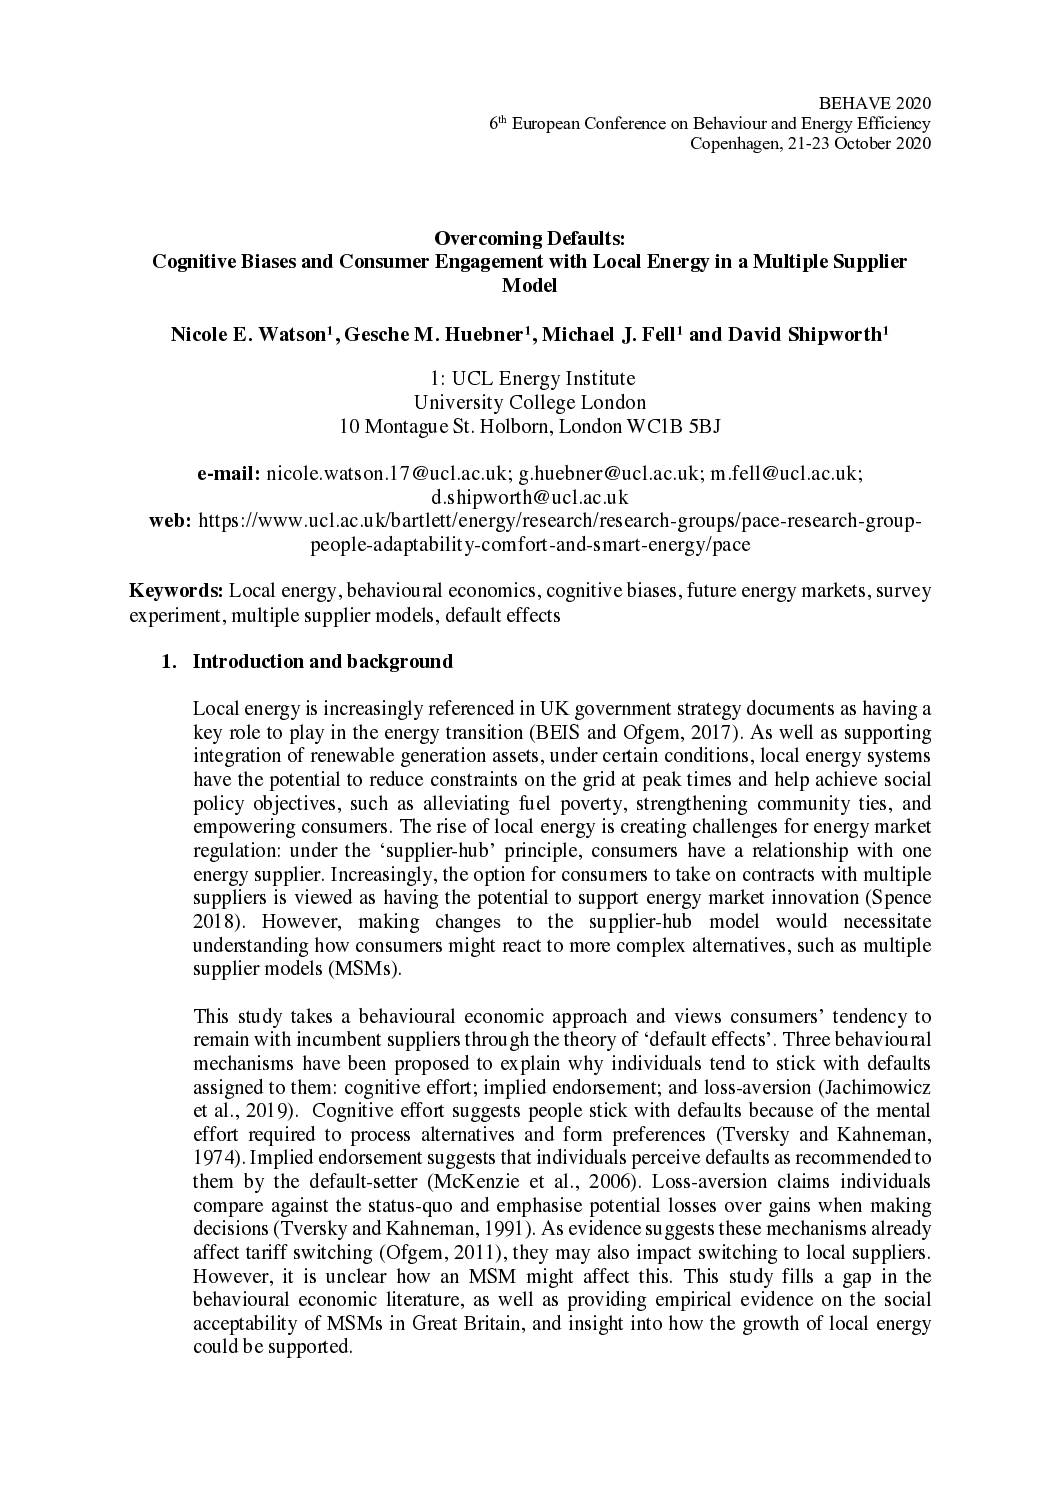 Cognitive Biases and Consumer Engagement with Local Energy in a Multiple Supplier Model